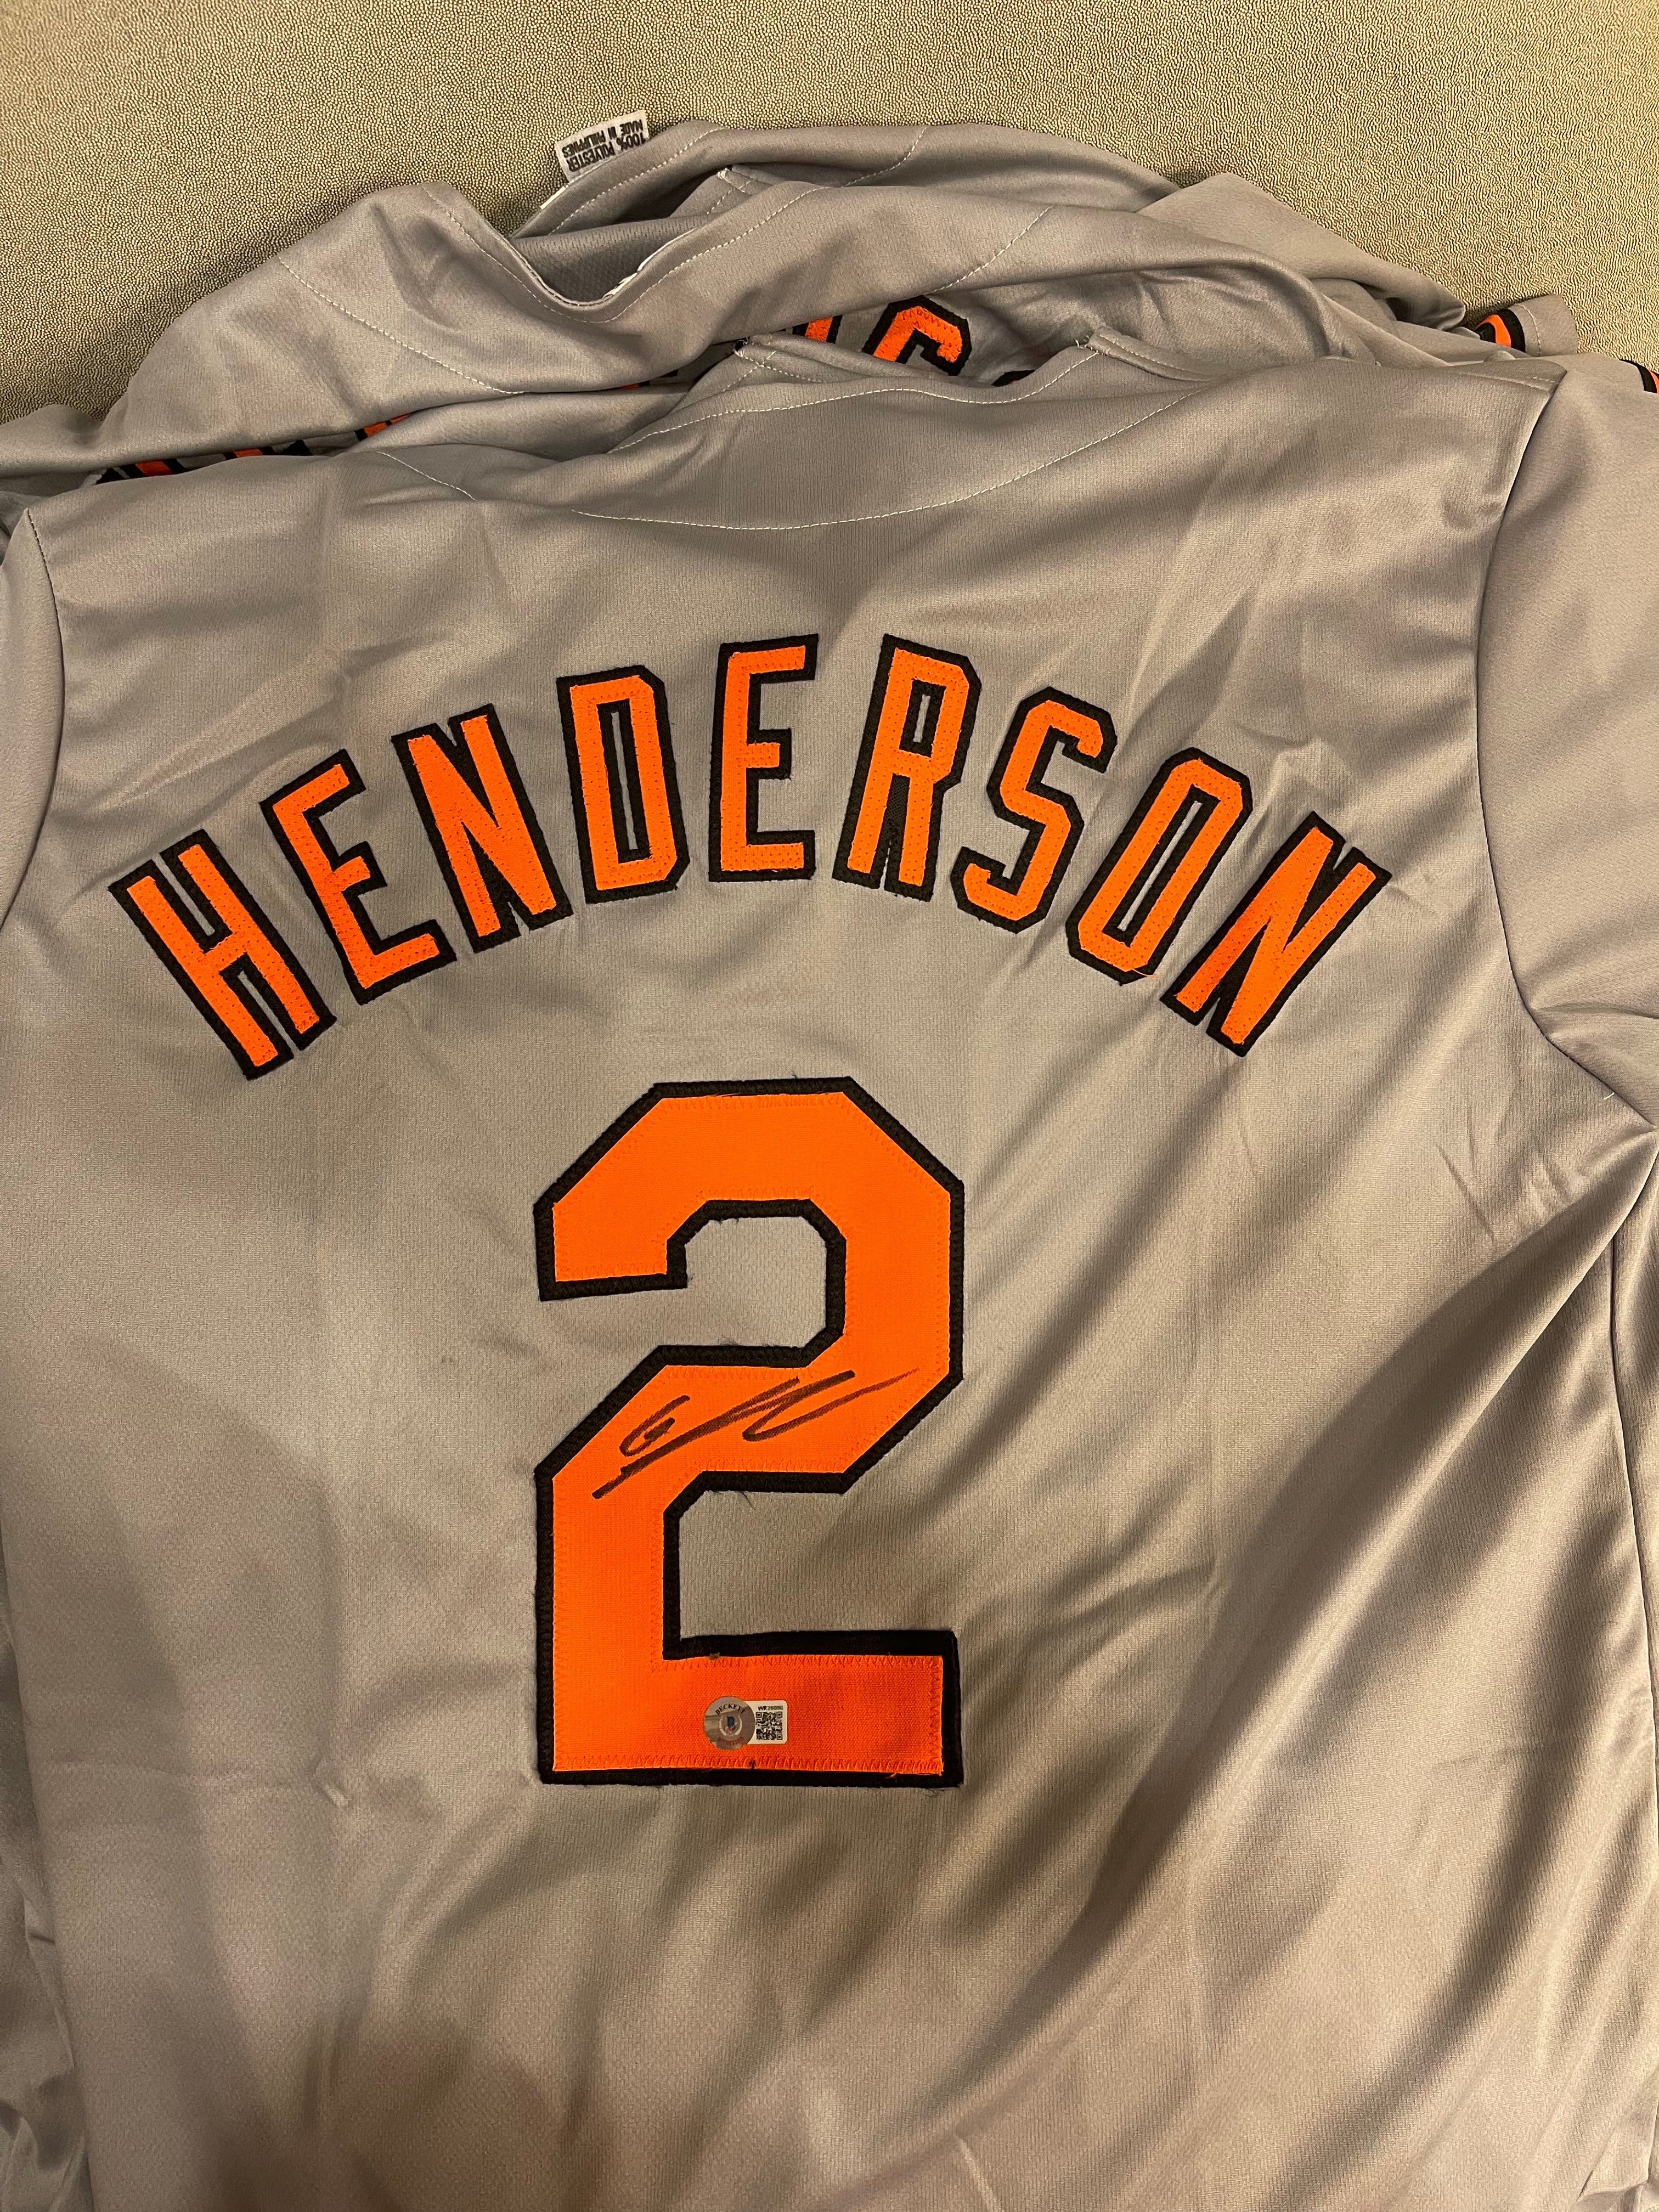 Gunnar Henderson Baltimore Orioles Signed Jersey – Lupton's Sports